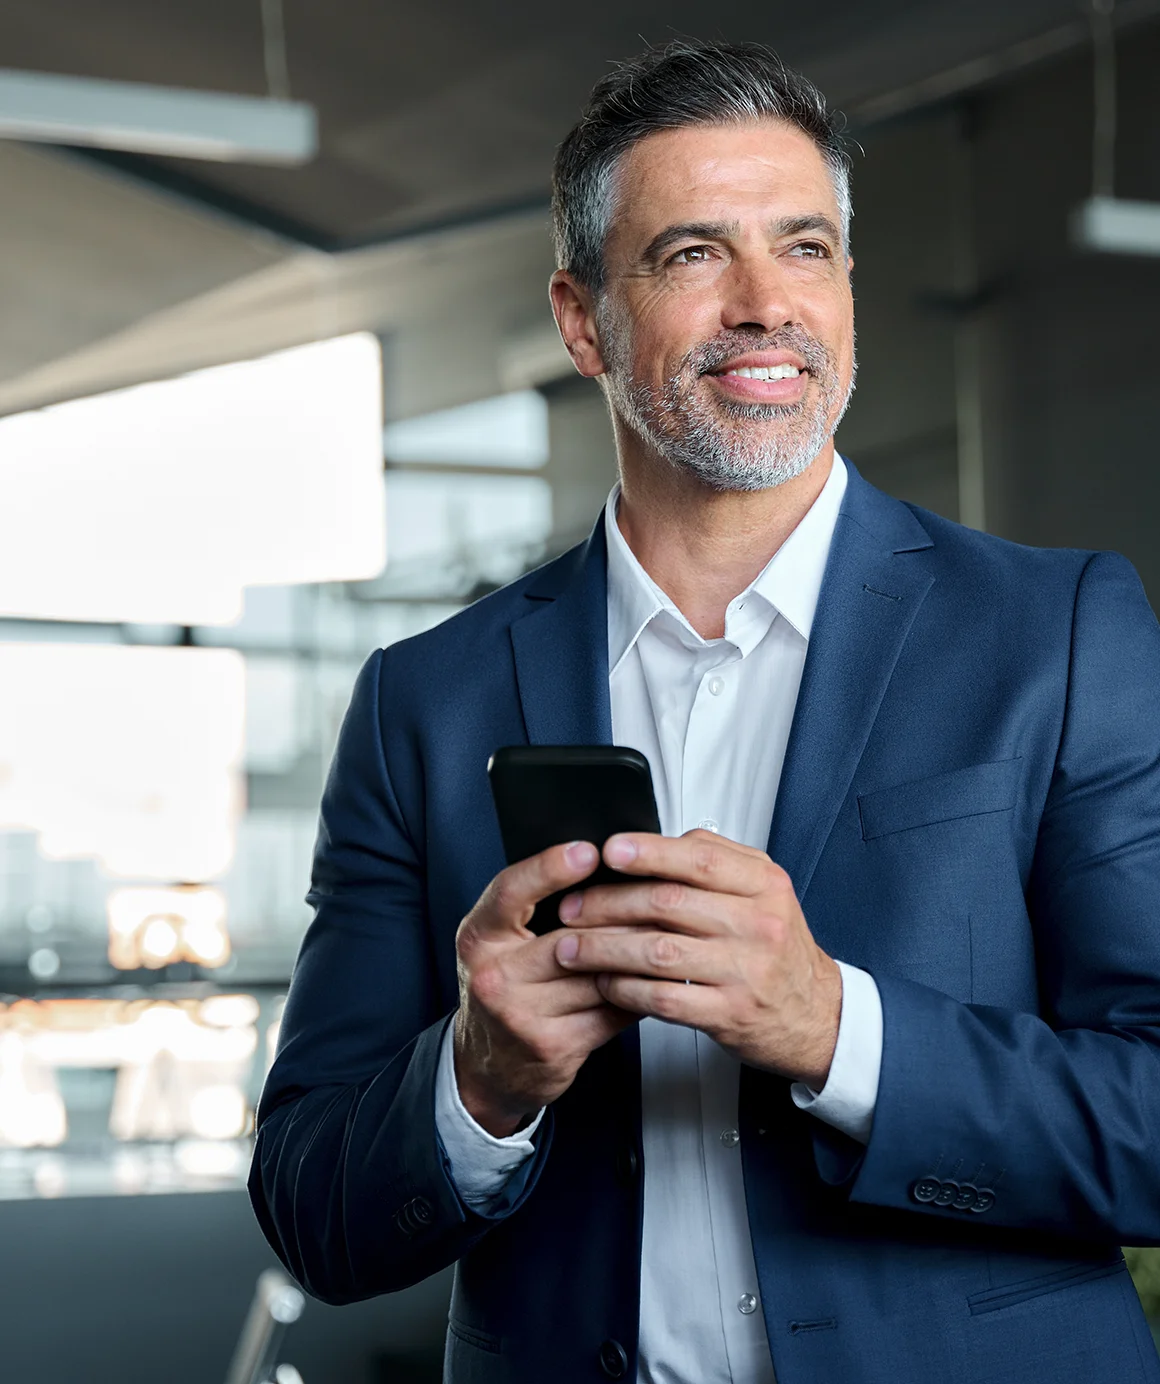 smiling happy confident mid aged male company ceo executive wearing suit holding cellphone